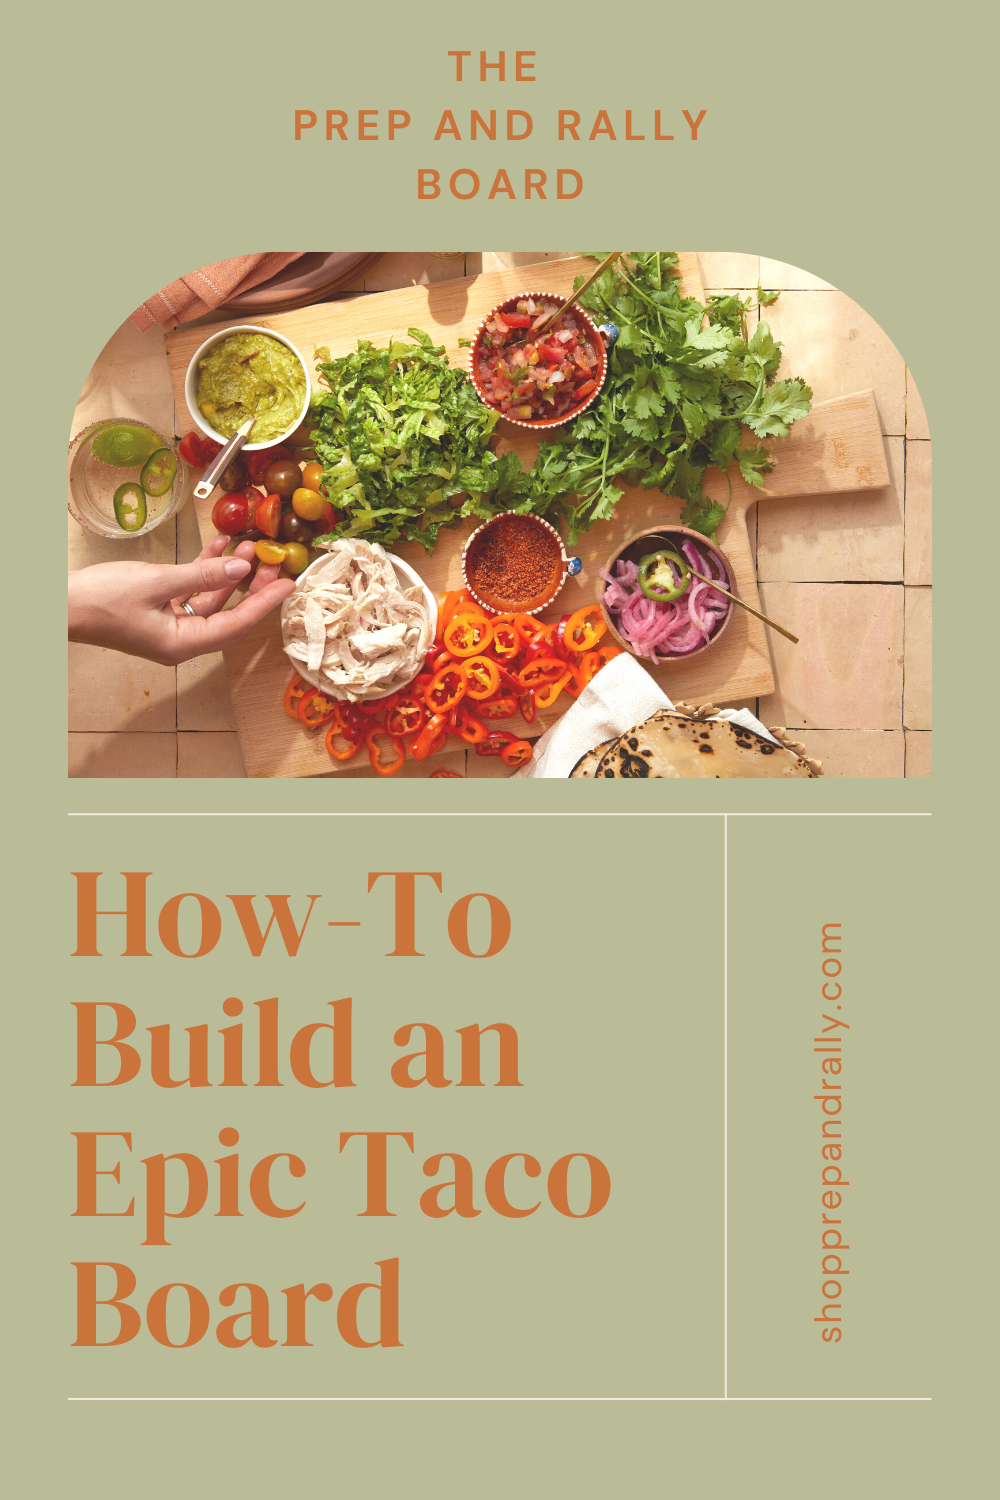 How to Make the Best Taco Dinner- Build an Epic Taco Board